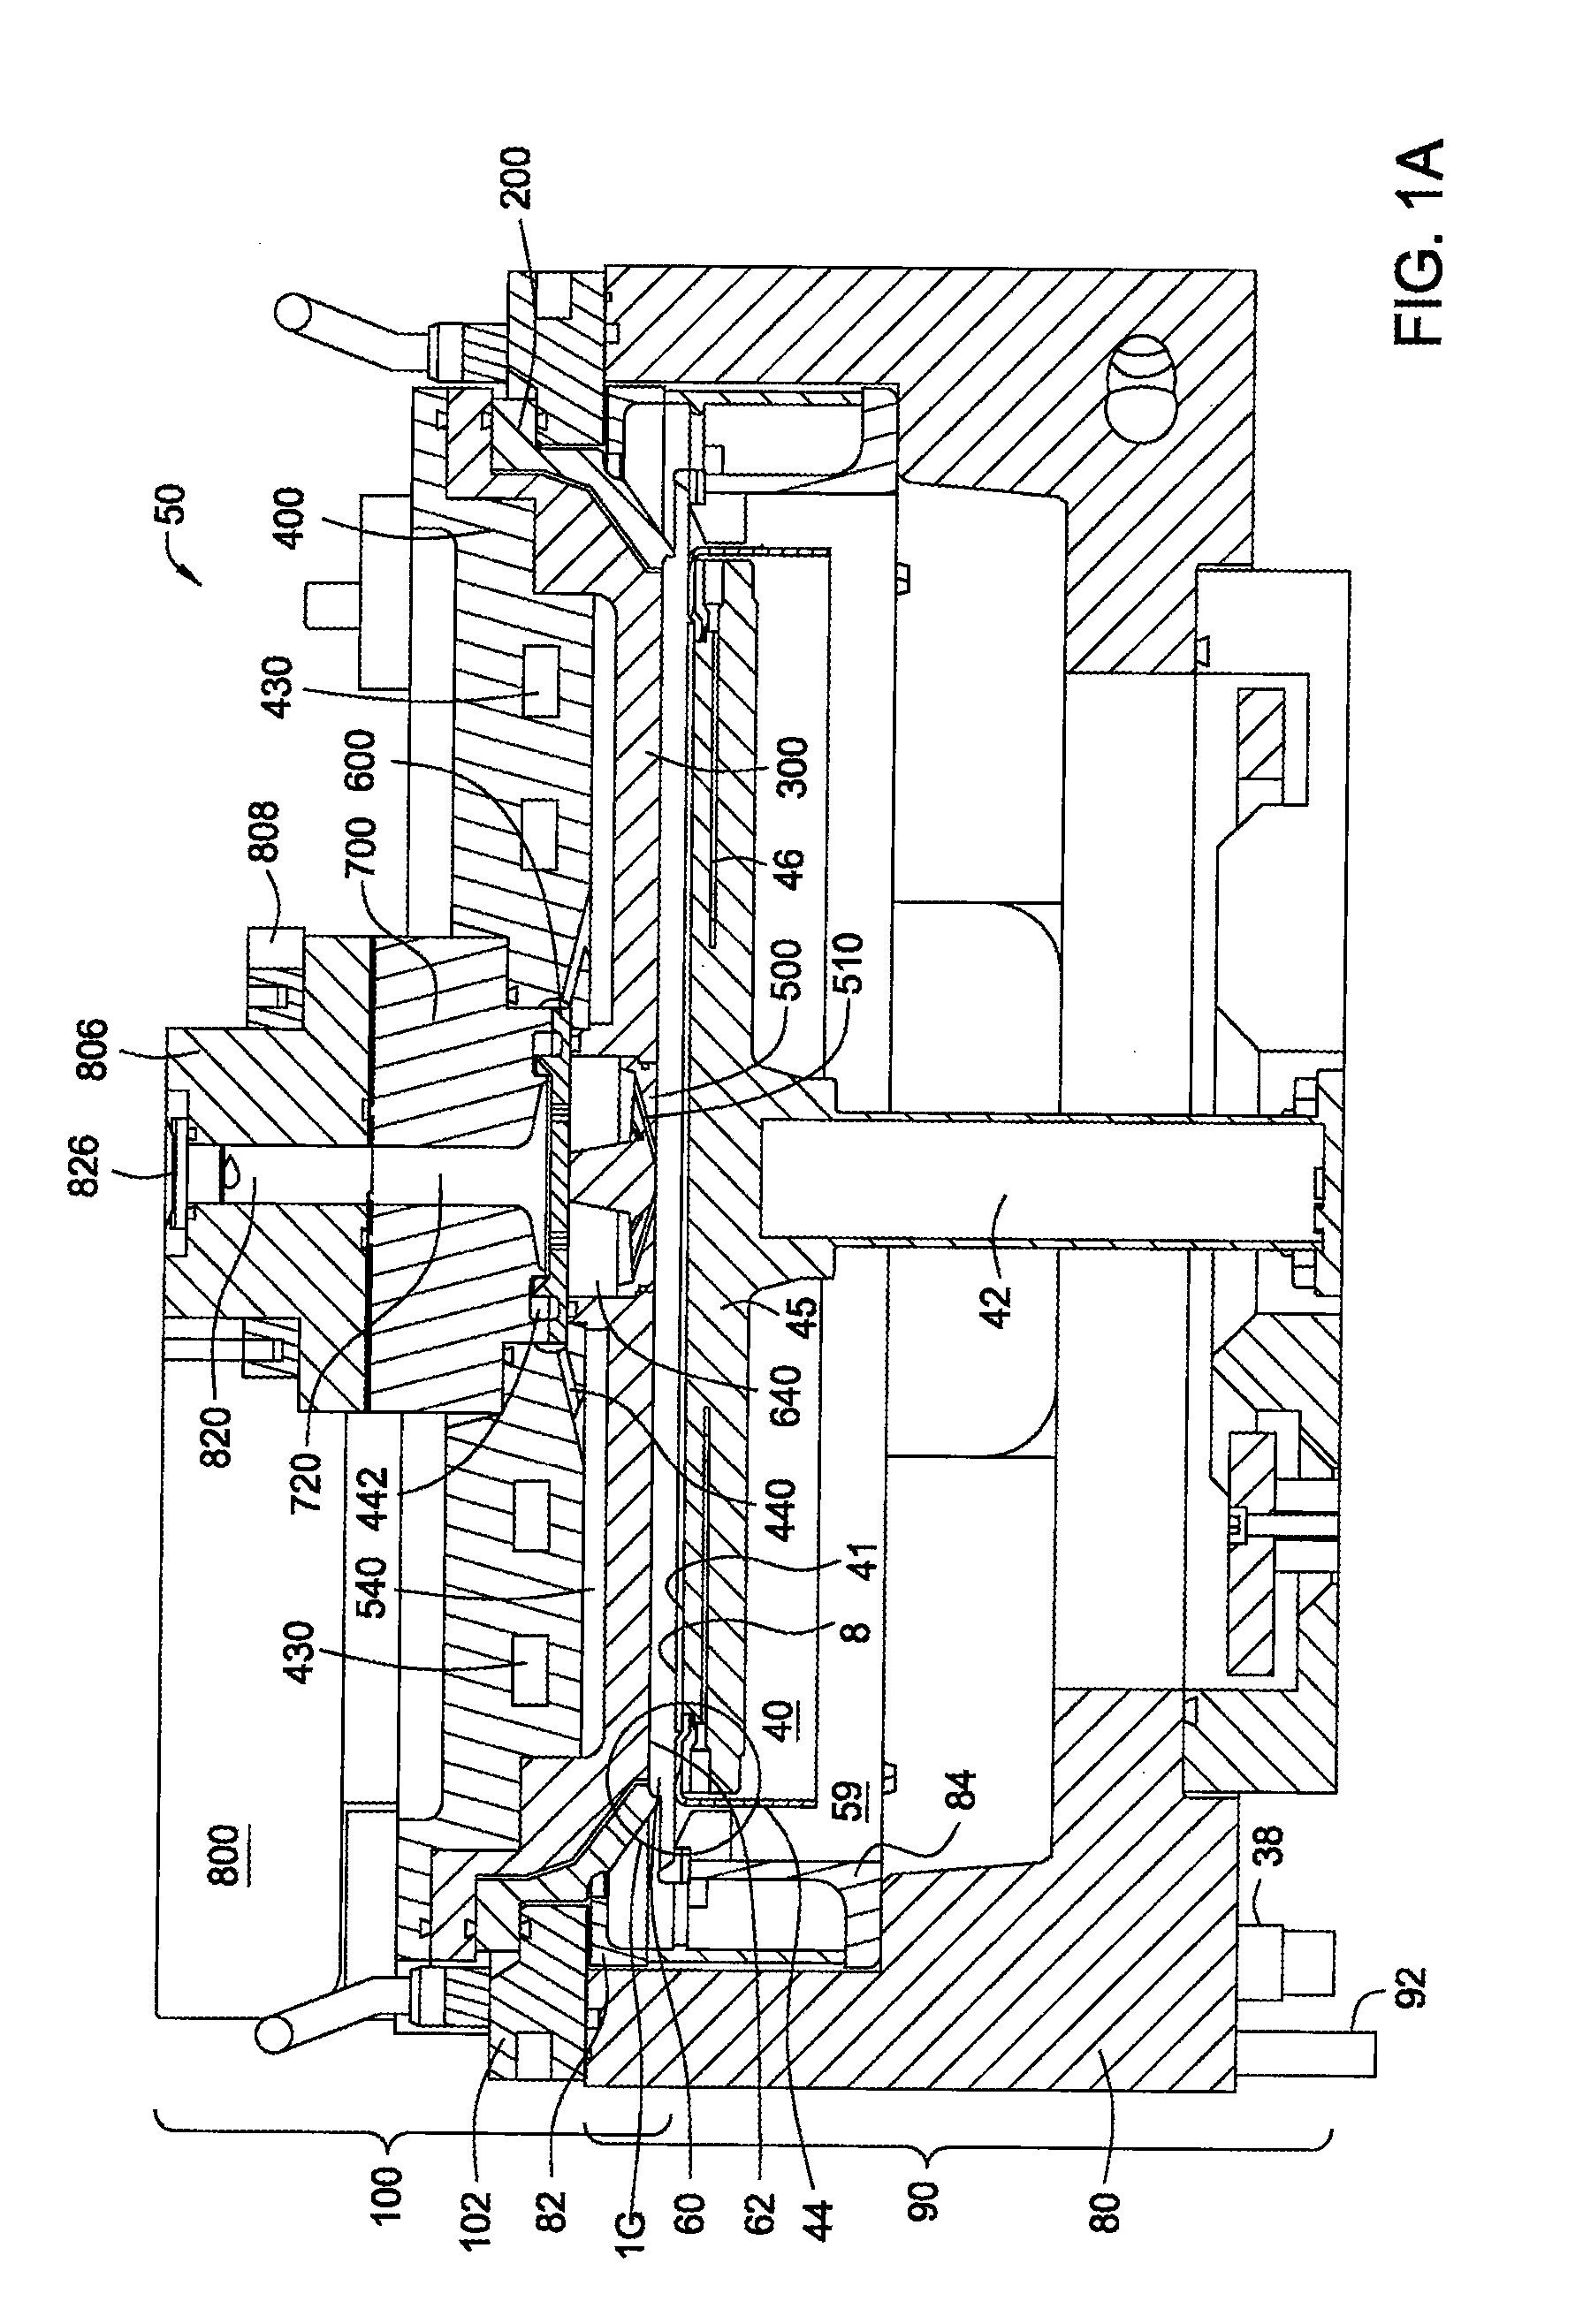 Apparatus and process for plasma-enhanced atomic layer deposition